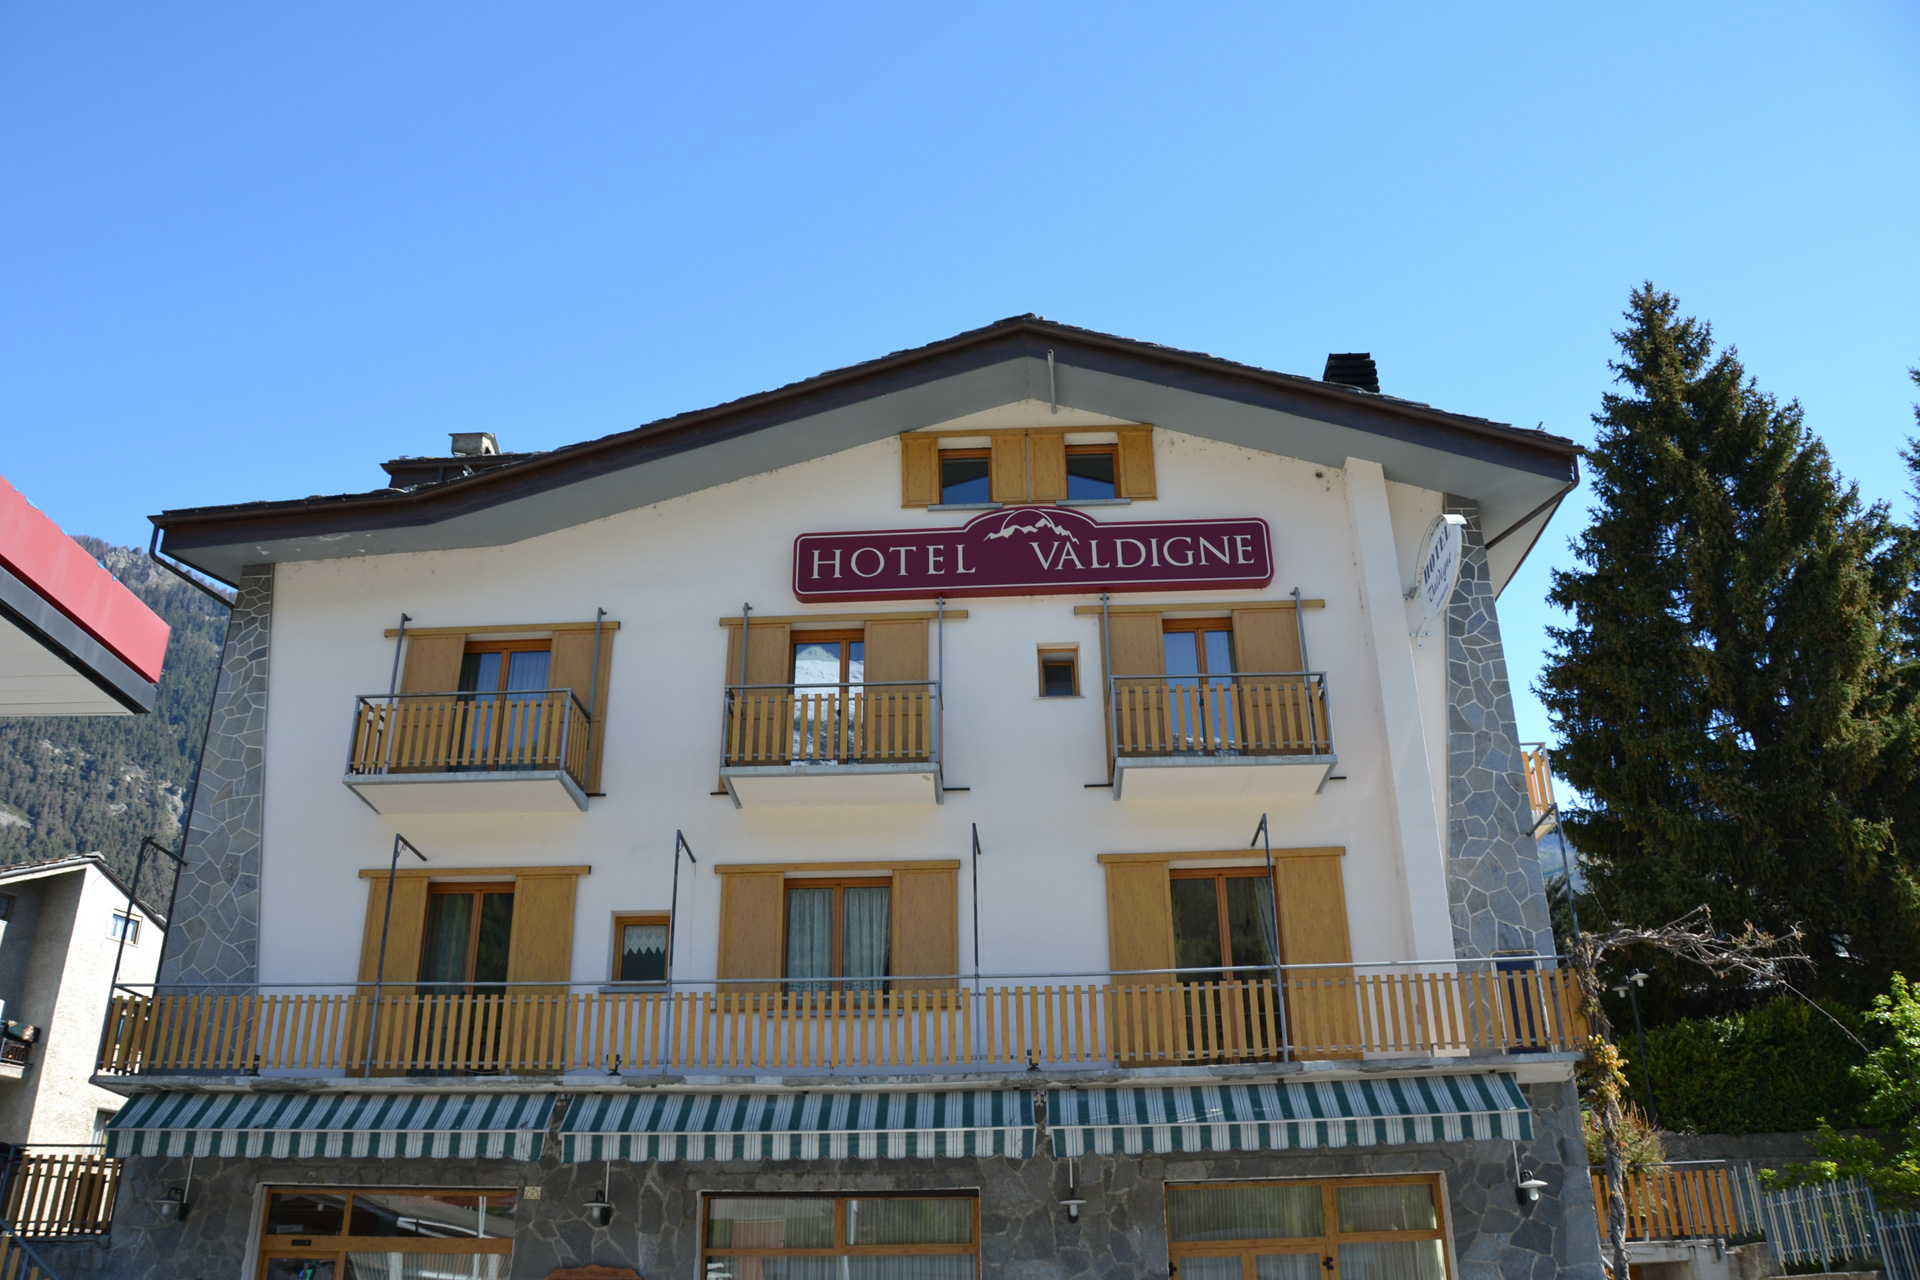  Hospitality in the heart of the Aosta Valley mountains